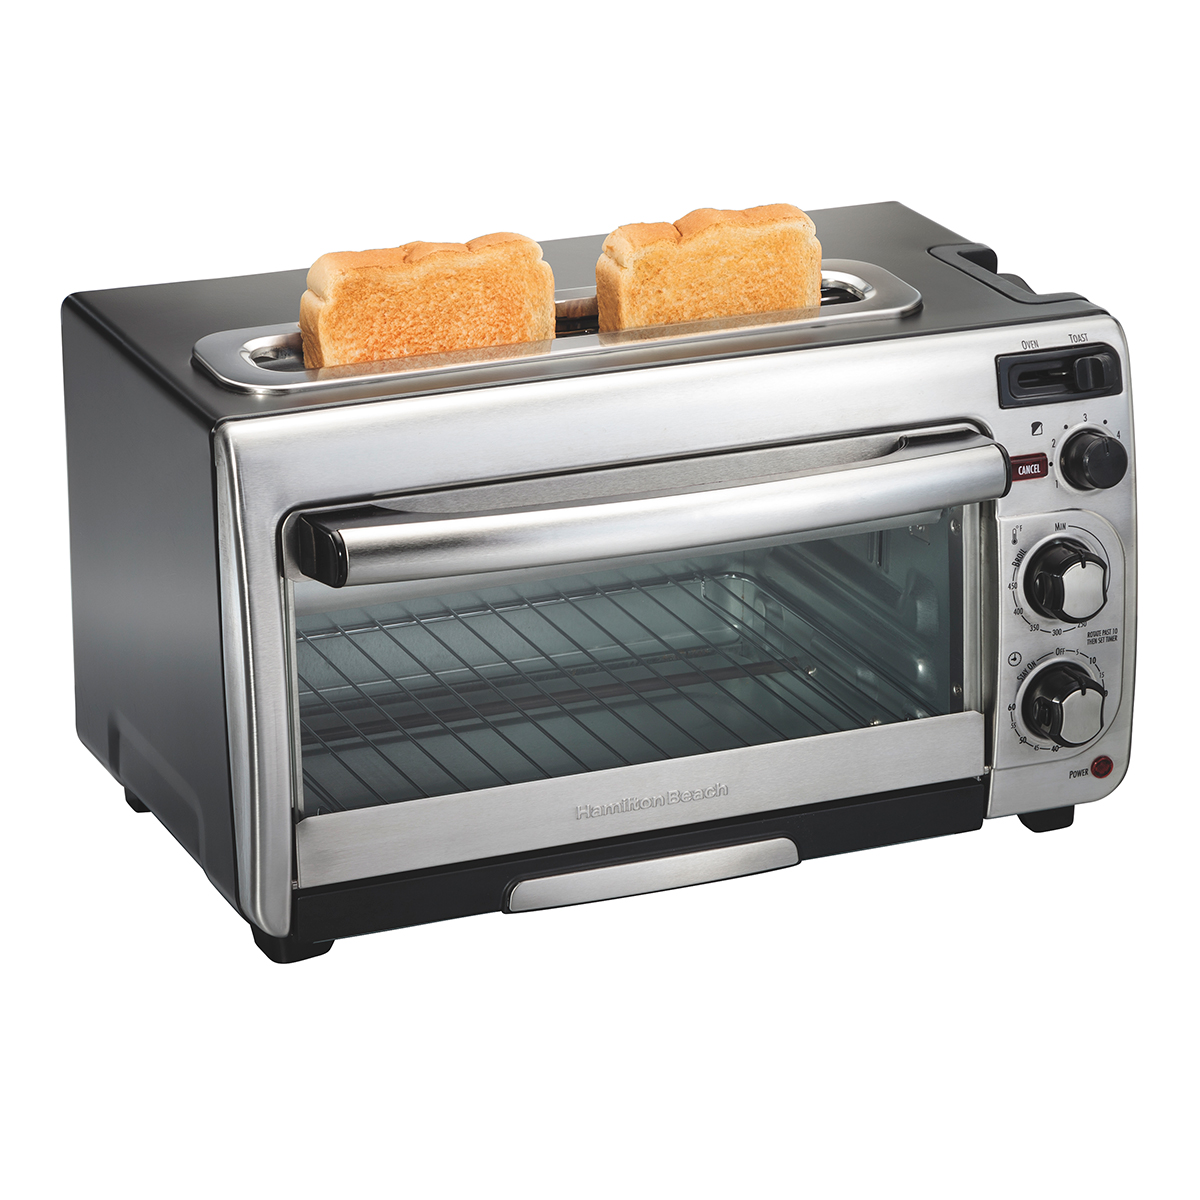 2-in-1 Oven and Toaster (31156G)